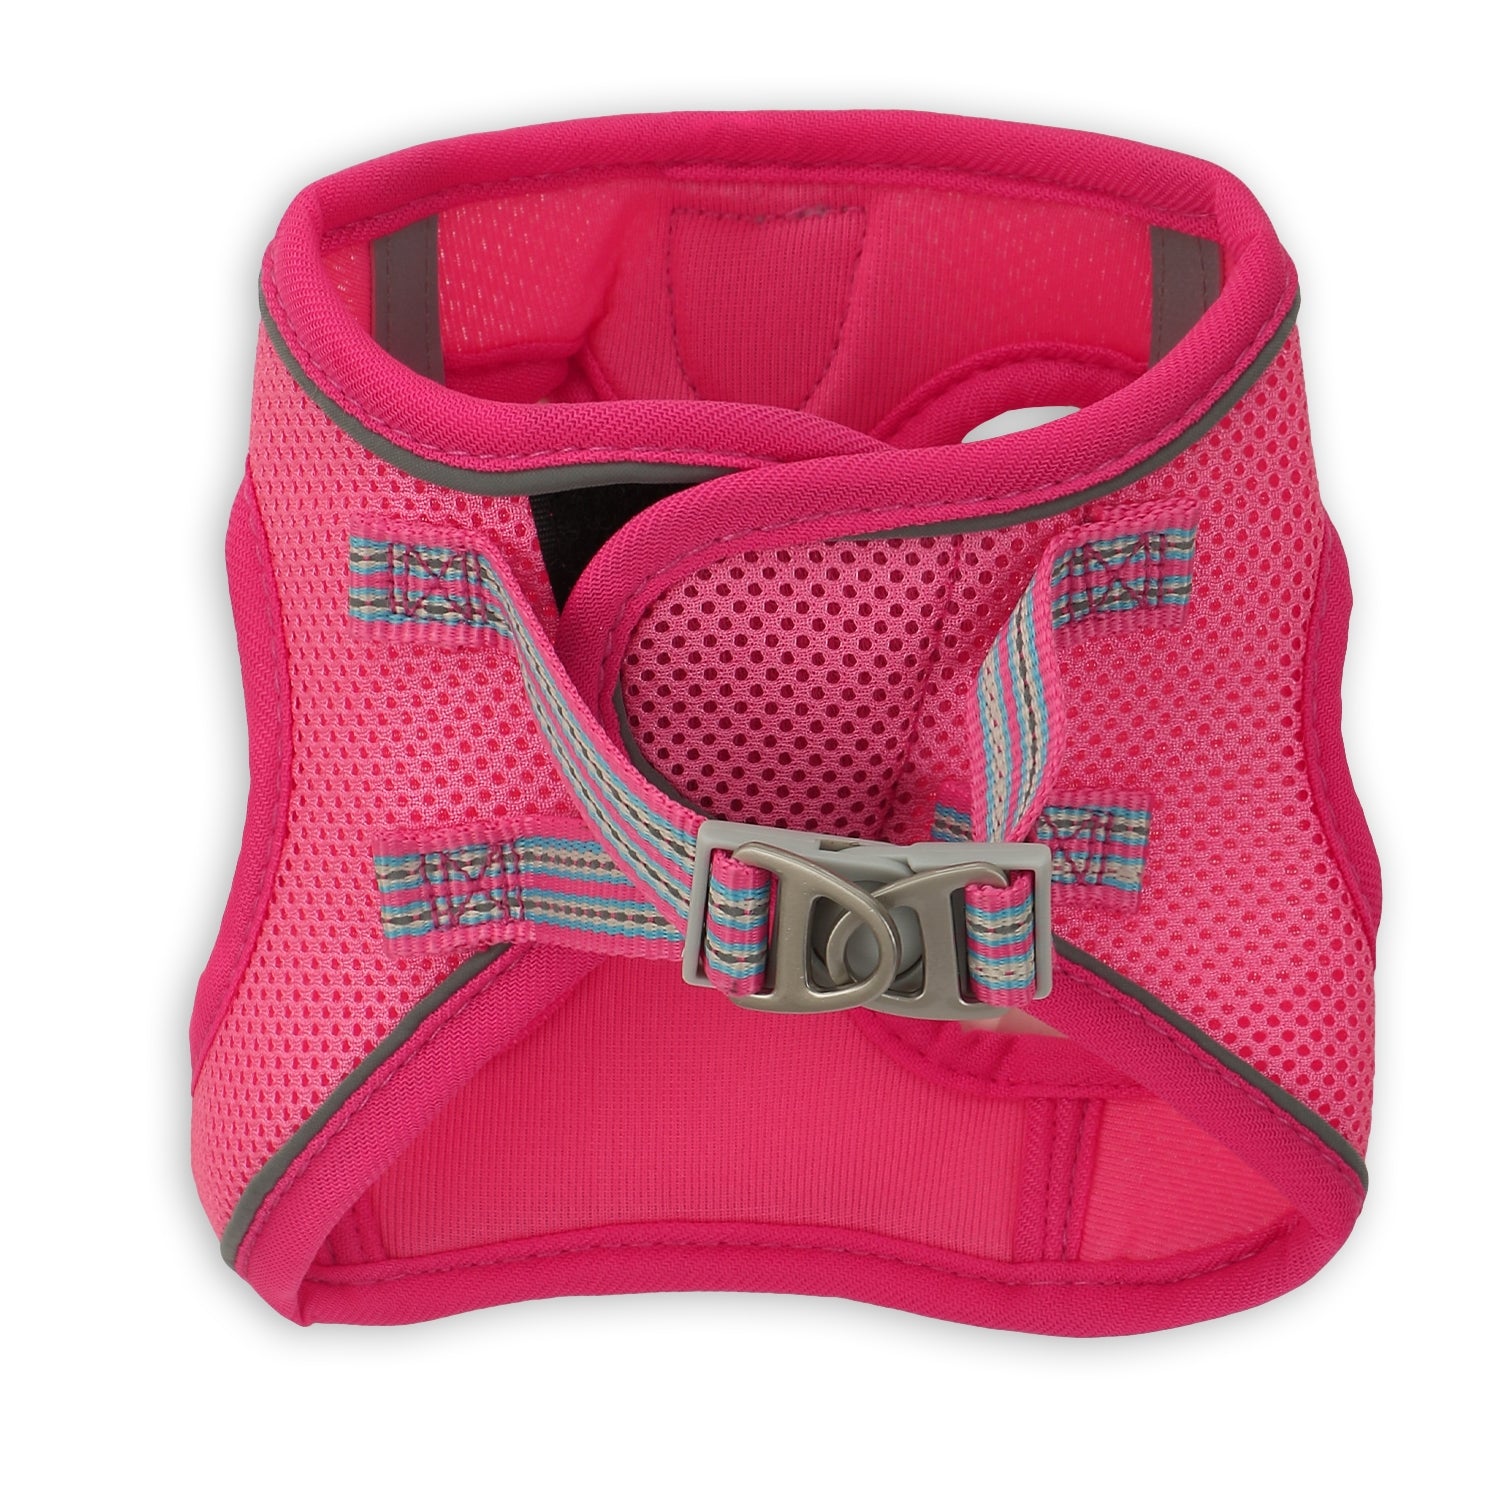 Basil - Adjustable Mesh Harness for Puppy, Dogs & Cats Pink